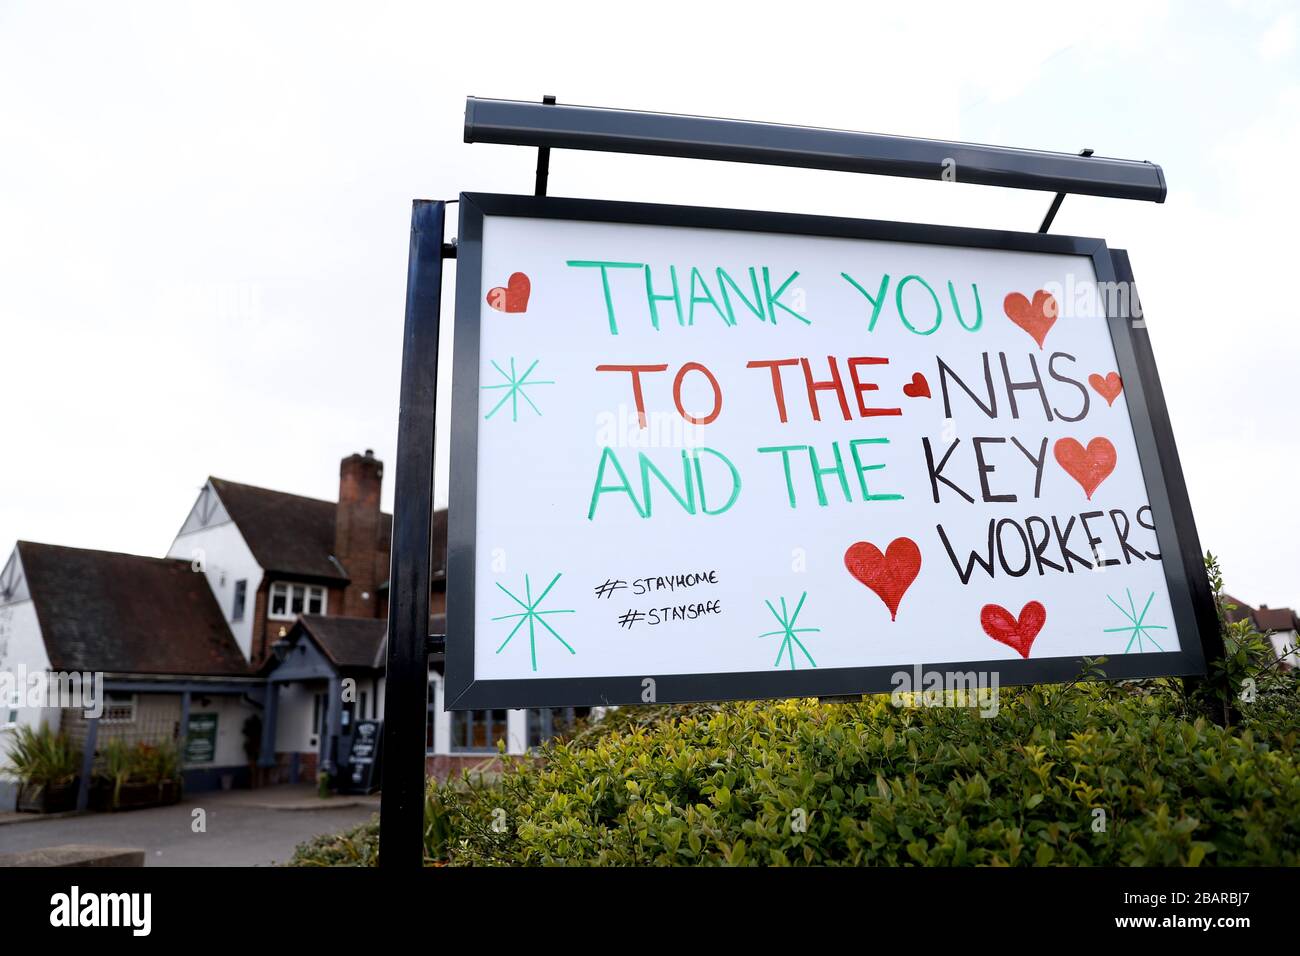 A sign outside a public house in Nottingham thanking the NHS and Keyworkers as the UK continues in lockdown to help curb the spread of the coronavirus. Stock Photo